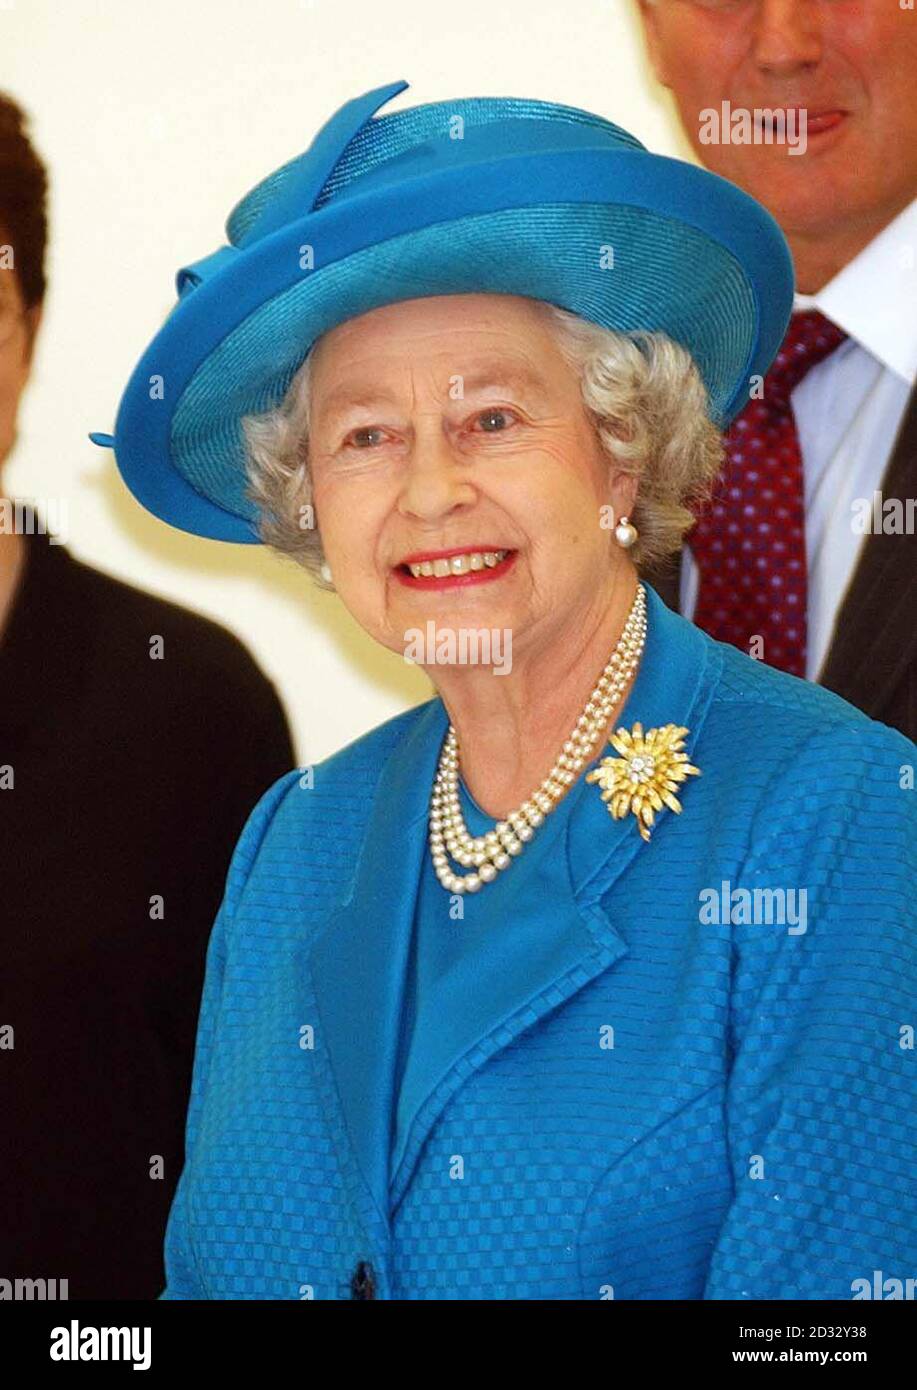 Britain's Queen Elizabeth II, during the opening of the newly built Royal Ballet School in central London's Covent Garden.  * 17/4/03: Queen Elizabeth II, dated 27/03/2003, who was giving Maundy Money to 77 men and 77 women in a setting familiar to Harry Potter fans.  The annual Royal Maundy Service was being held at Gloucester Cathedral where scenes in the JK Rowling films were shot.  Recipients of the Maundy coins are all senior citizens recommended by clergy and ministers of all Christian denominations, in recognition of service to the Church and the community.   Stock Photo